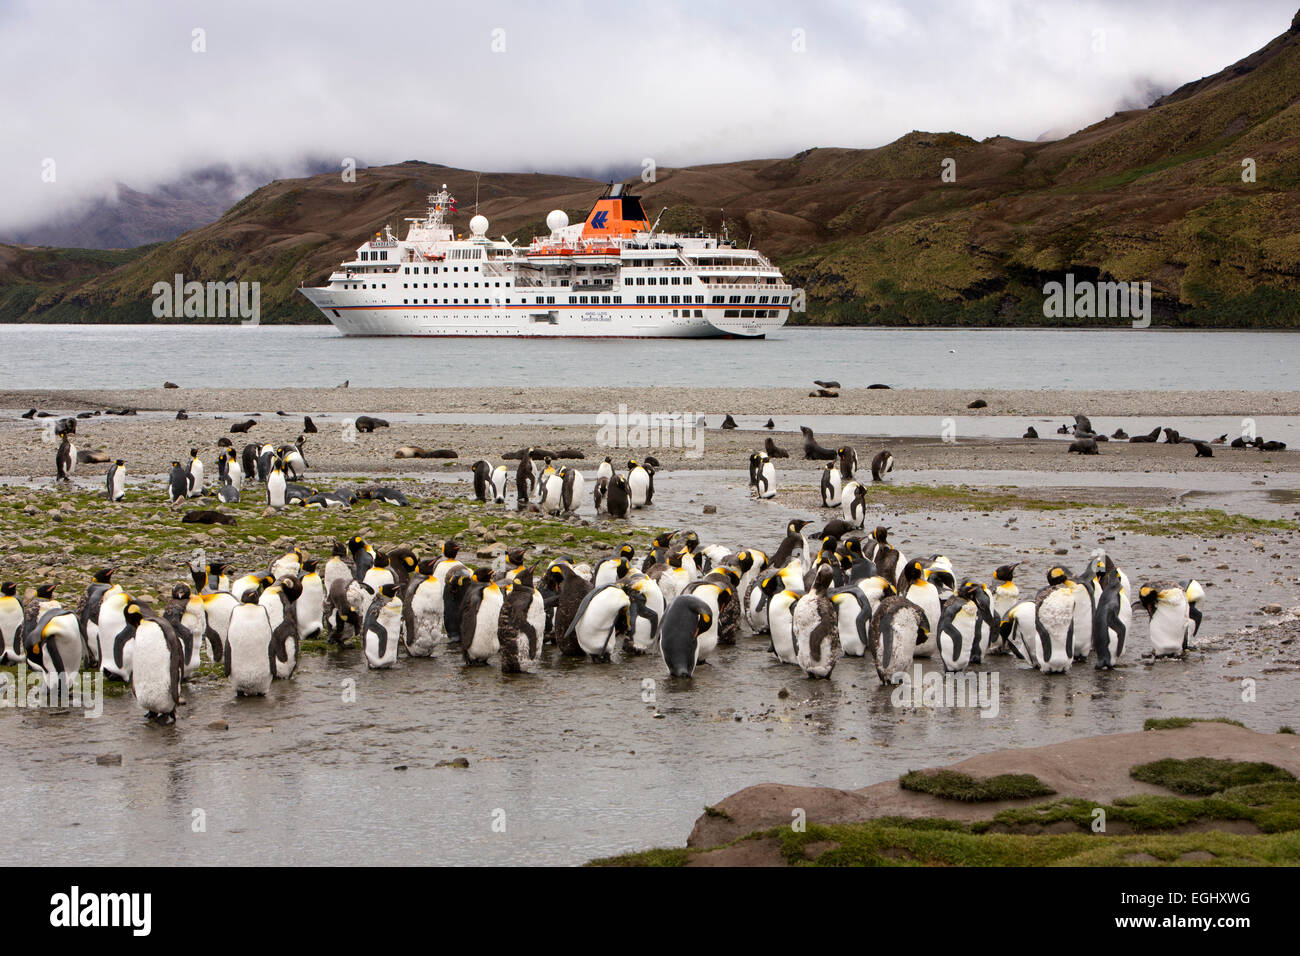 South Georgia, Stromness, group of king penguins on beach, MS Hanseatic moored in bay Stock Photo